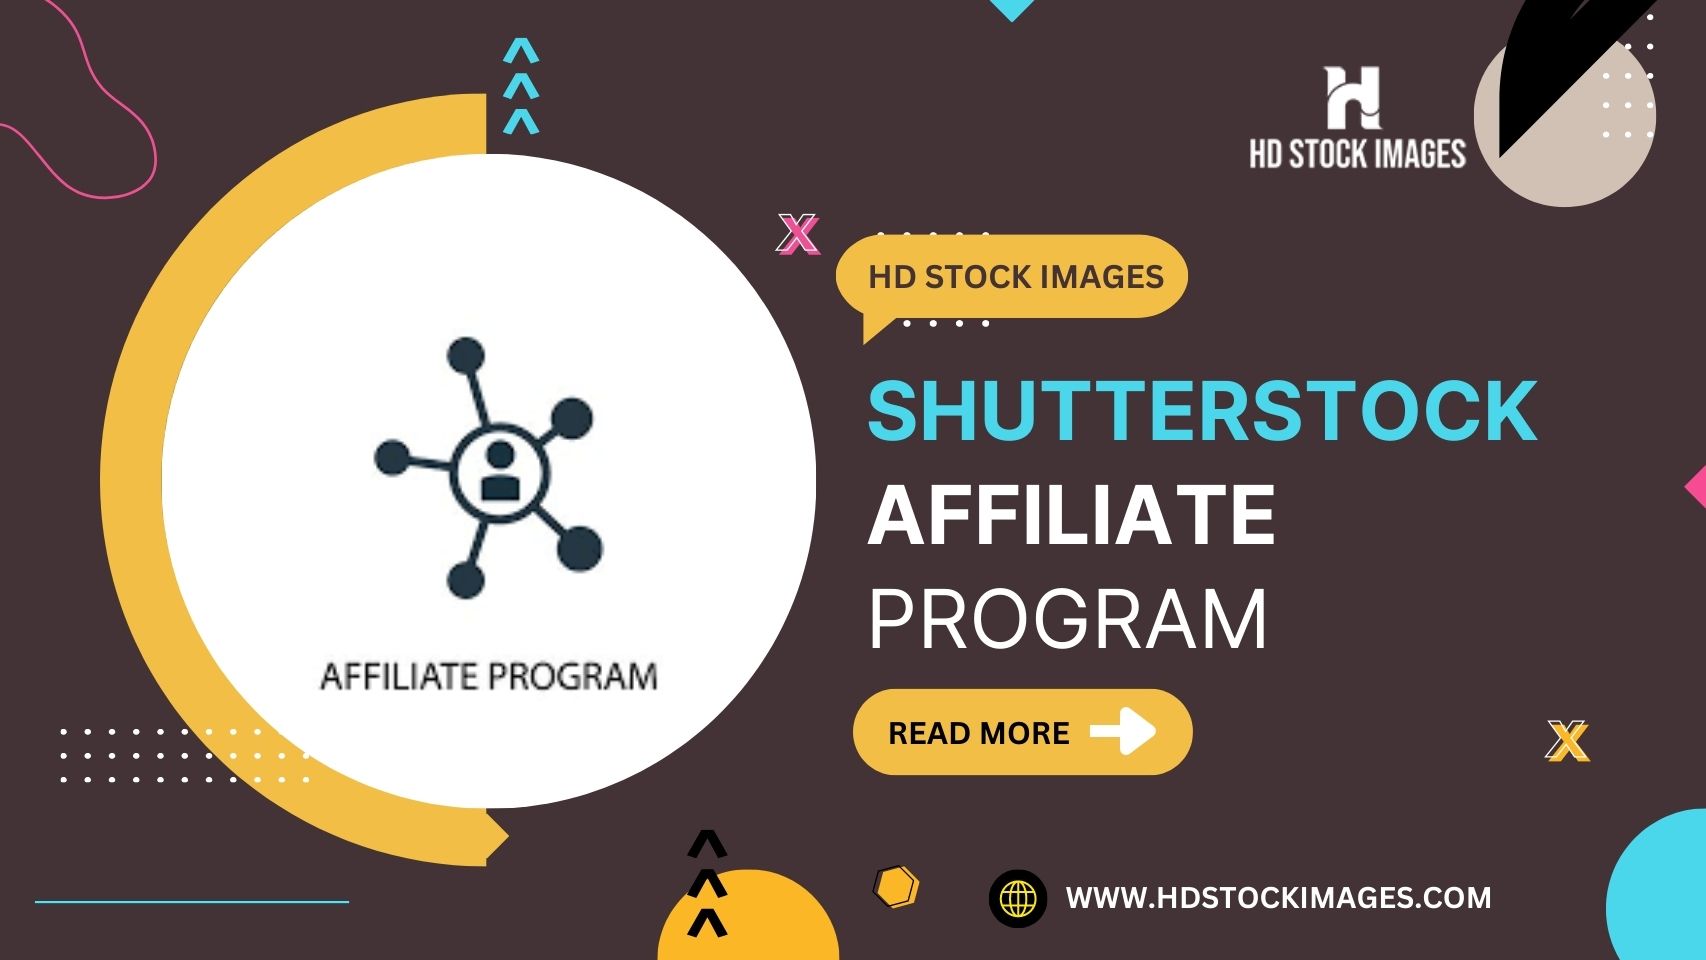 an image of Shutterstock Affiliate Program: Earning Opportunities and Benefits for Promoting Shutterstock Images